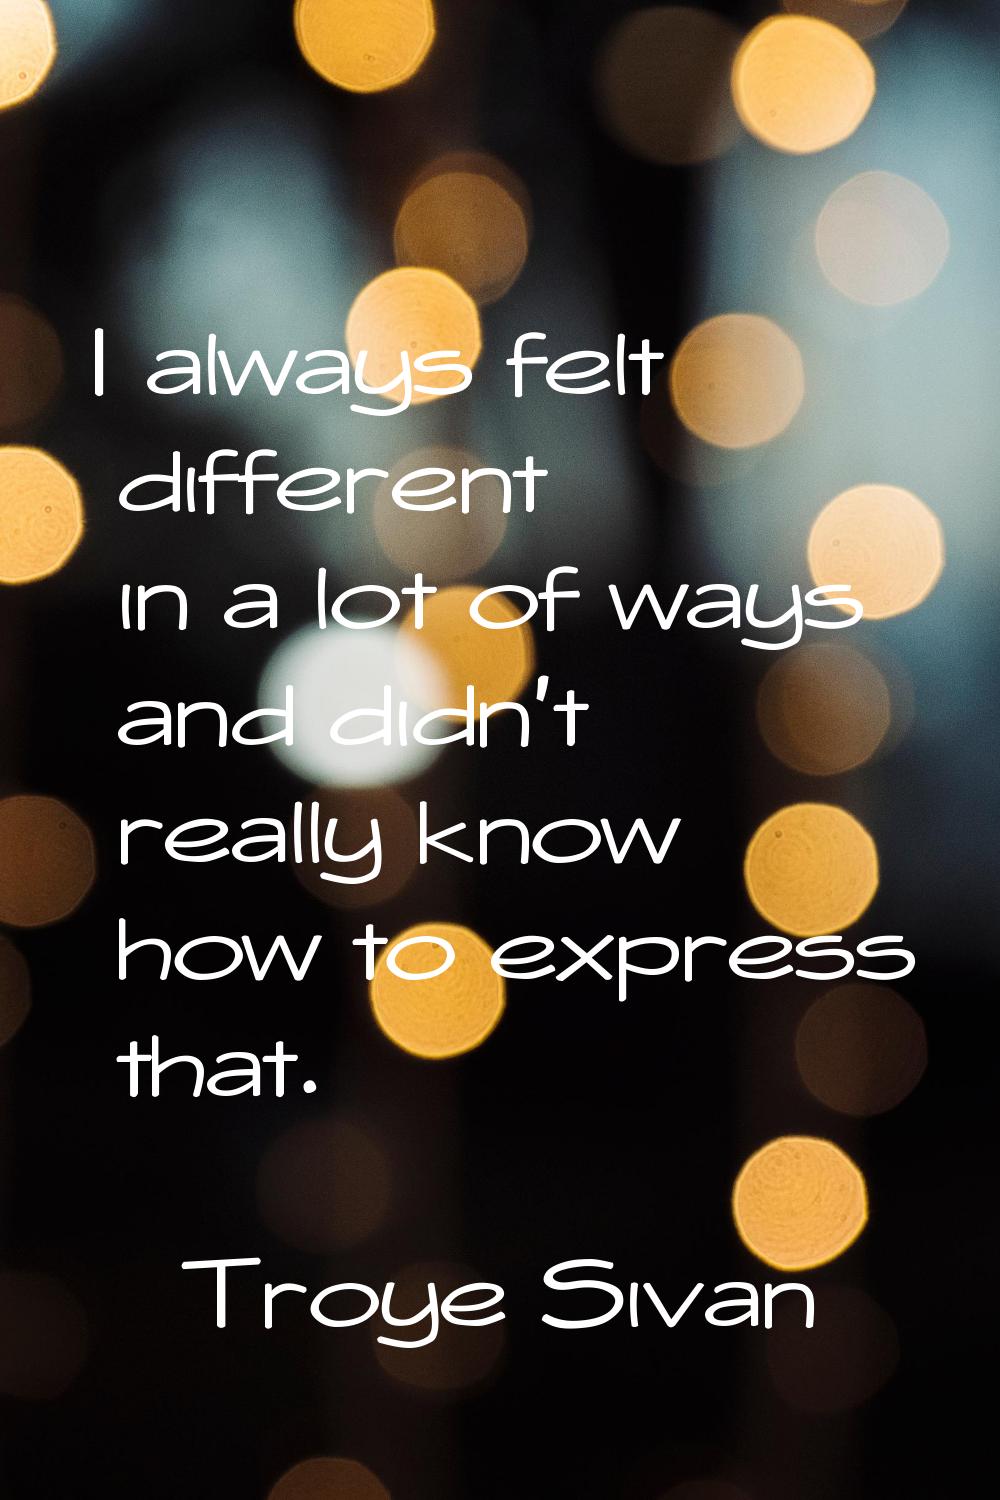 I always felt different in a lot of ways and didn't really know how to express that.